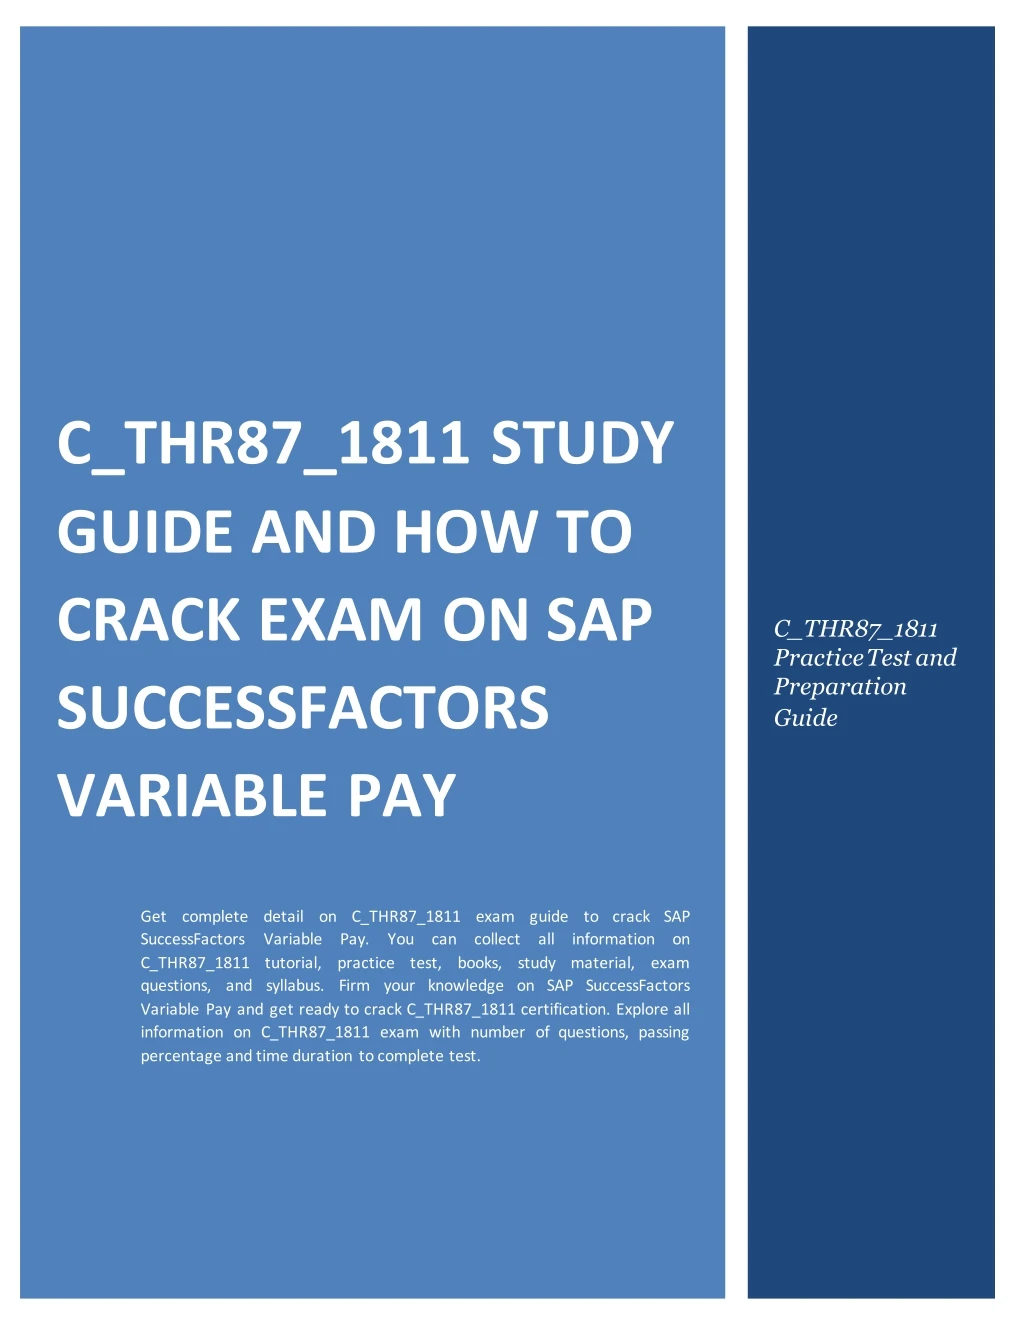 c thr87 1811 study guide and how to crack exam